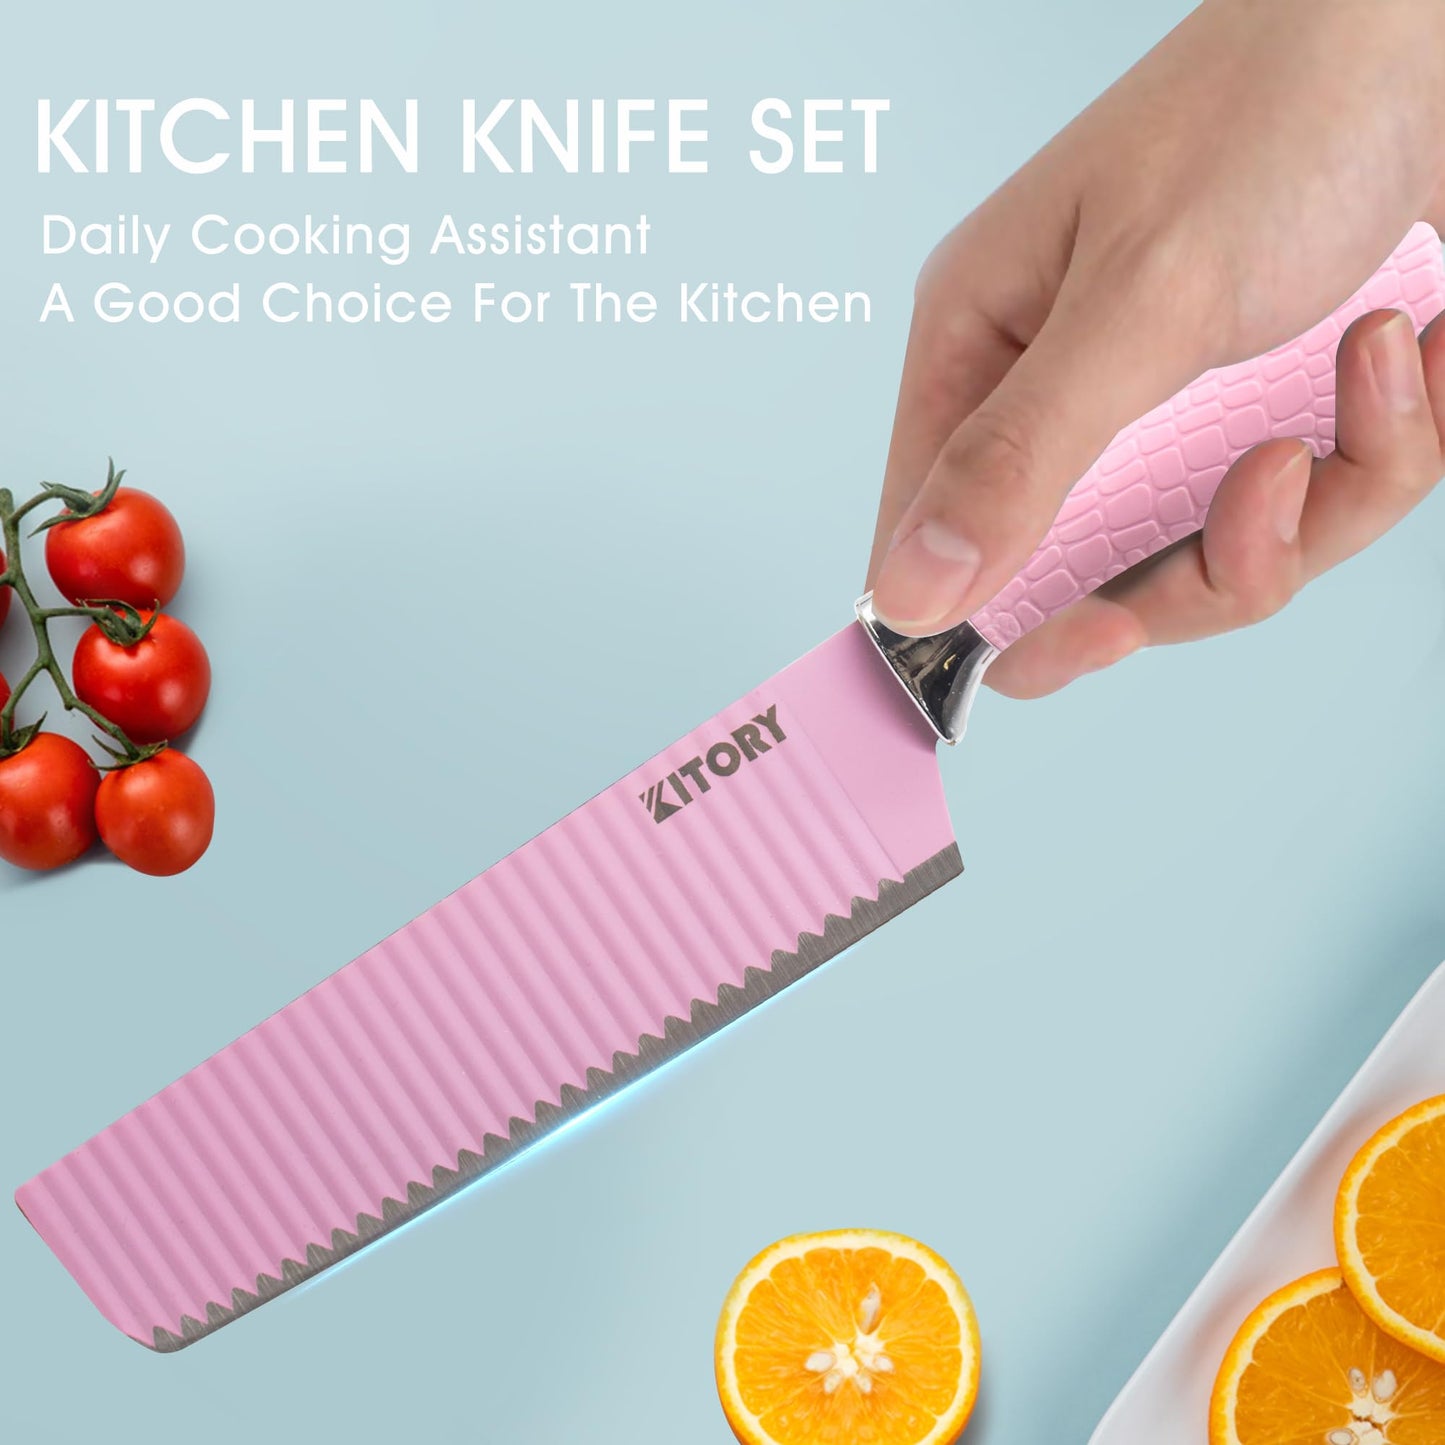 Kitory 6 Pcs Knife Set, Chef Knife Set & Steak Knives, High Carbon Stainless Steel Knives with Pink Wave Horseshoe Handle, Professional Design Collection Gifts